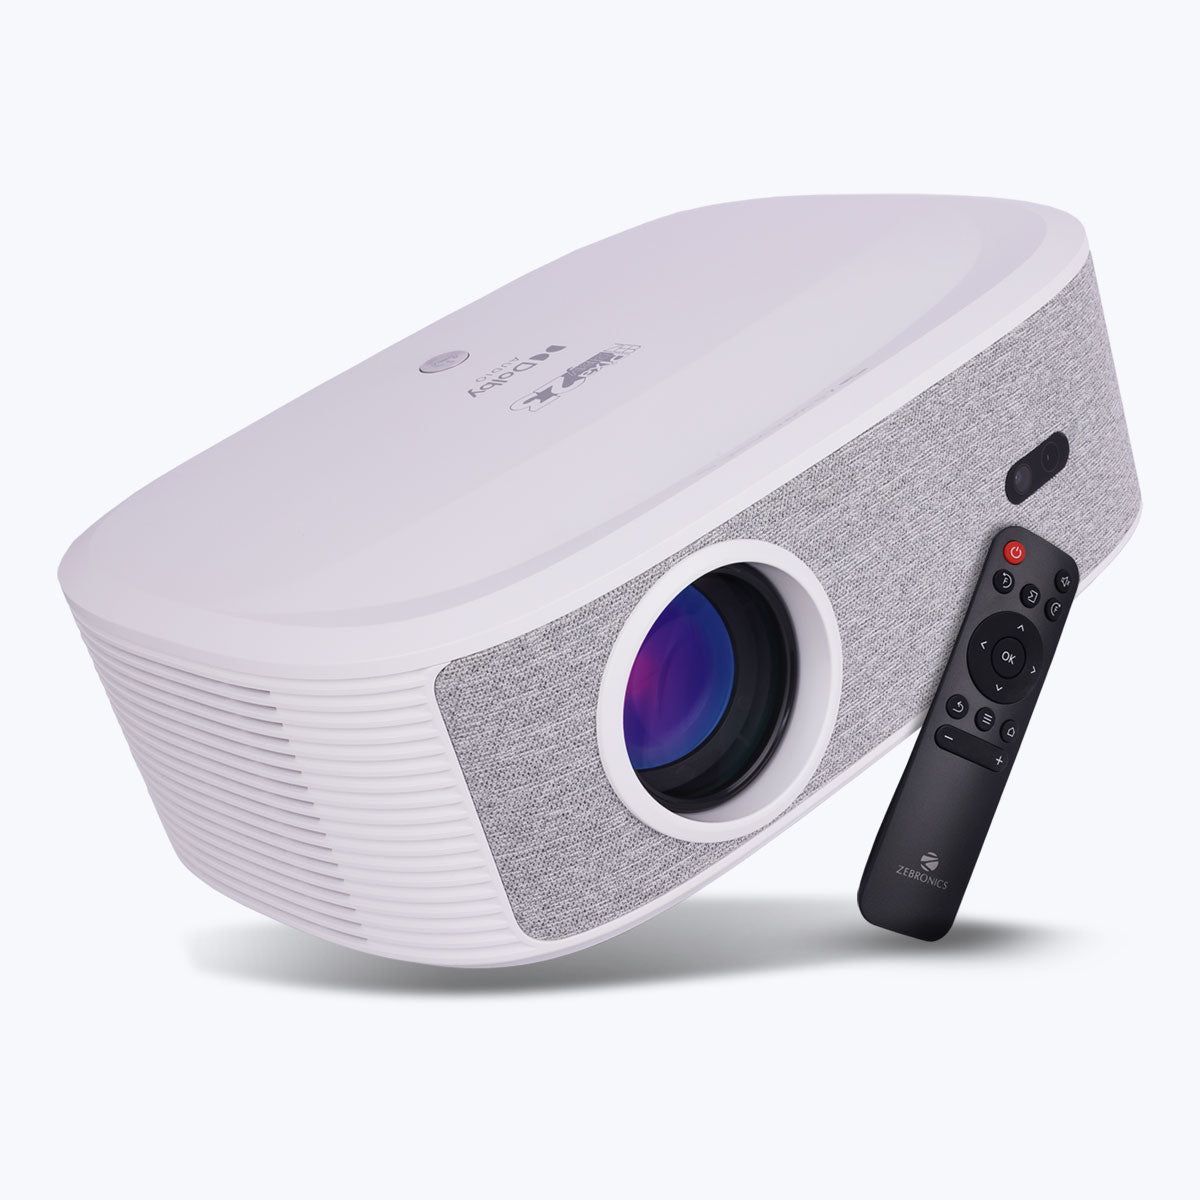 What Is A Good Projector For Home Use